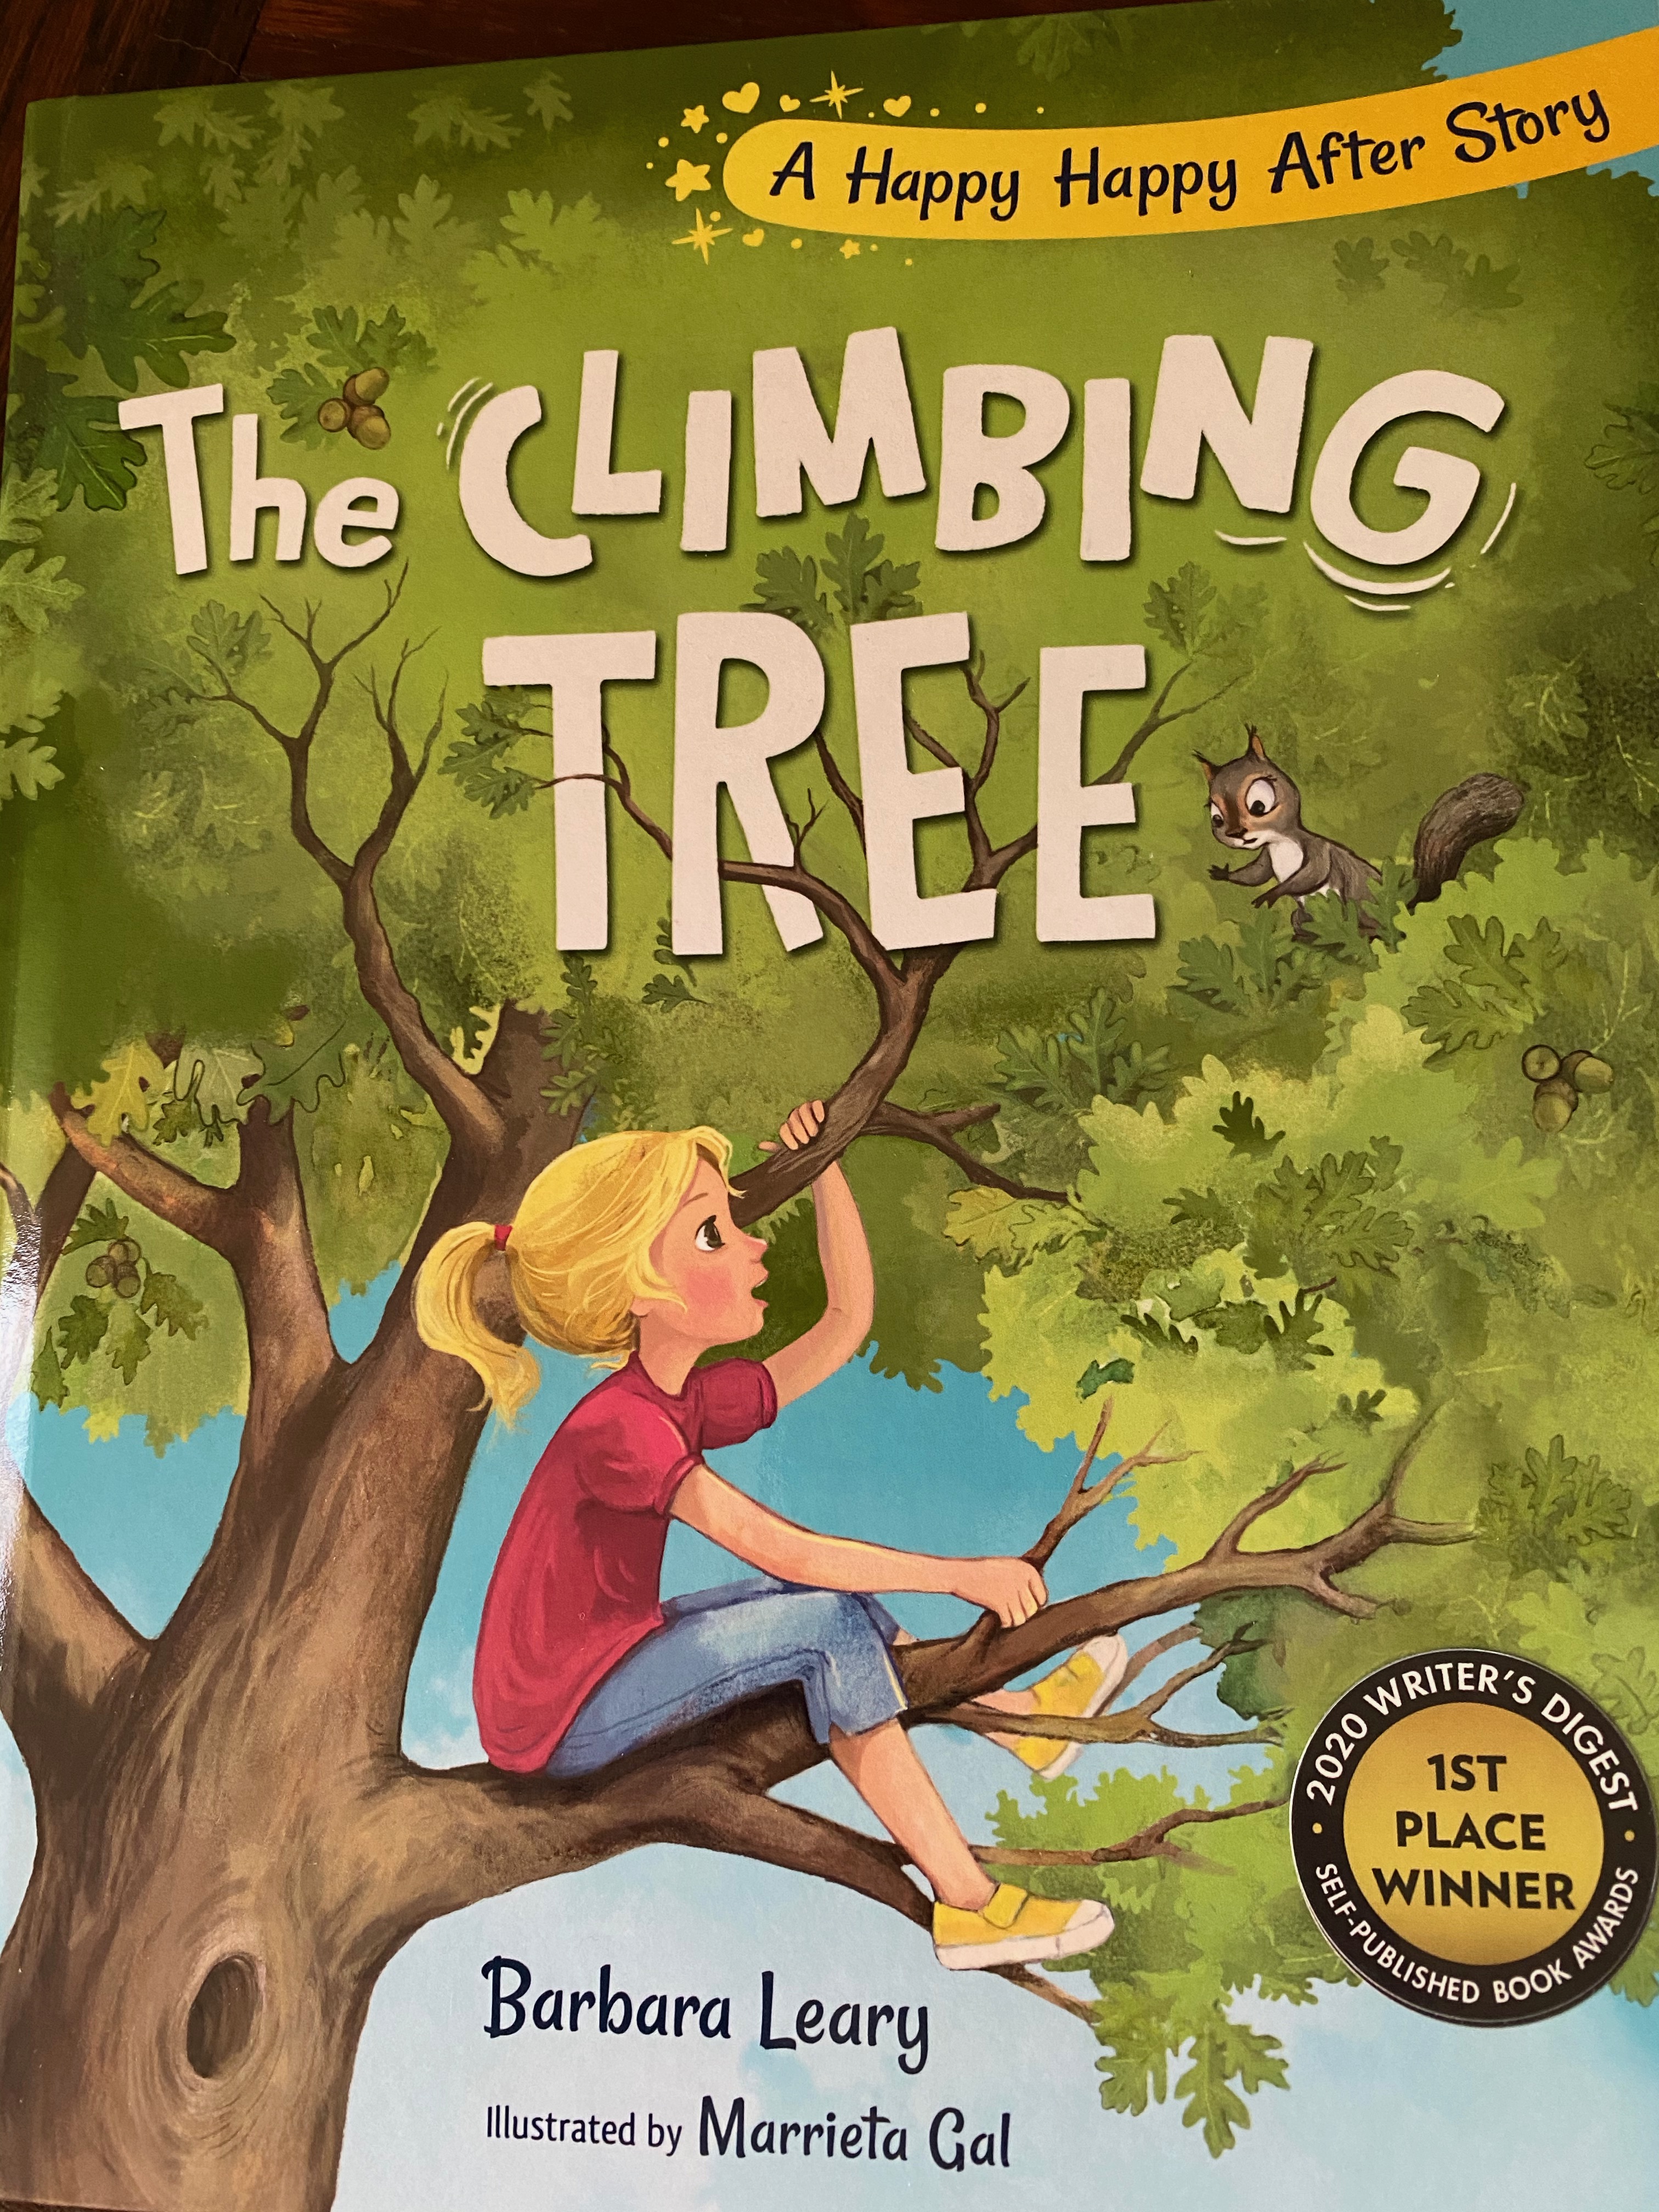 Barbara Leary's award-winning children's book, The Climbing Tree, was inspired by her granddaughter's love of the tree she first learned to climb.